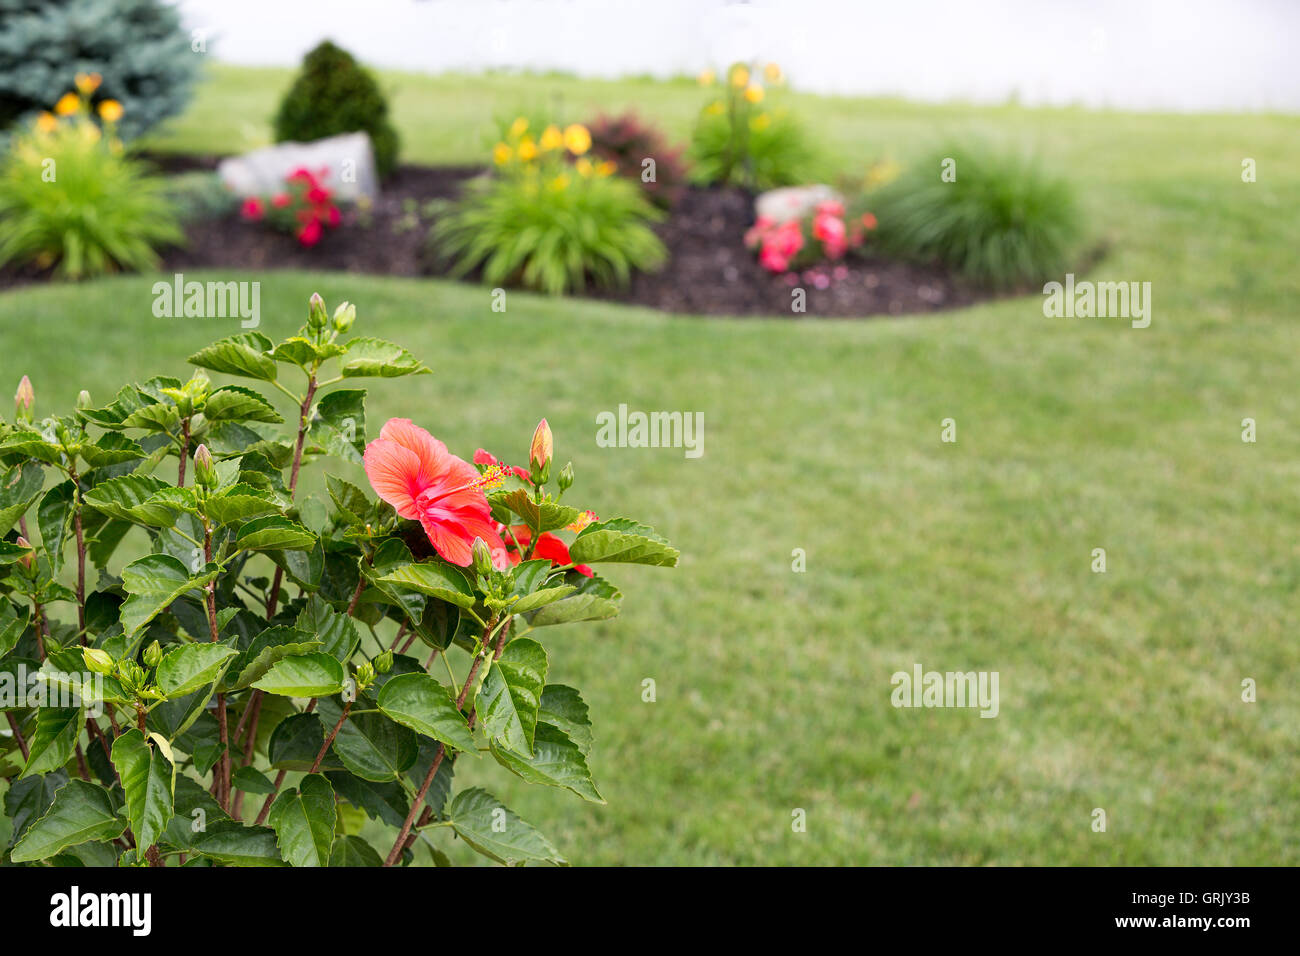 Colorful red tropical hibiscus flower on a lush green bush with buds overlooking a newly landscaped garden with a manicured lawn Stock Photo